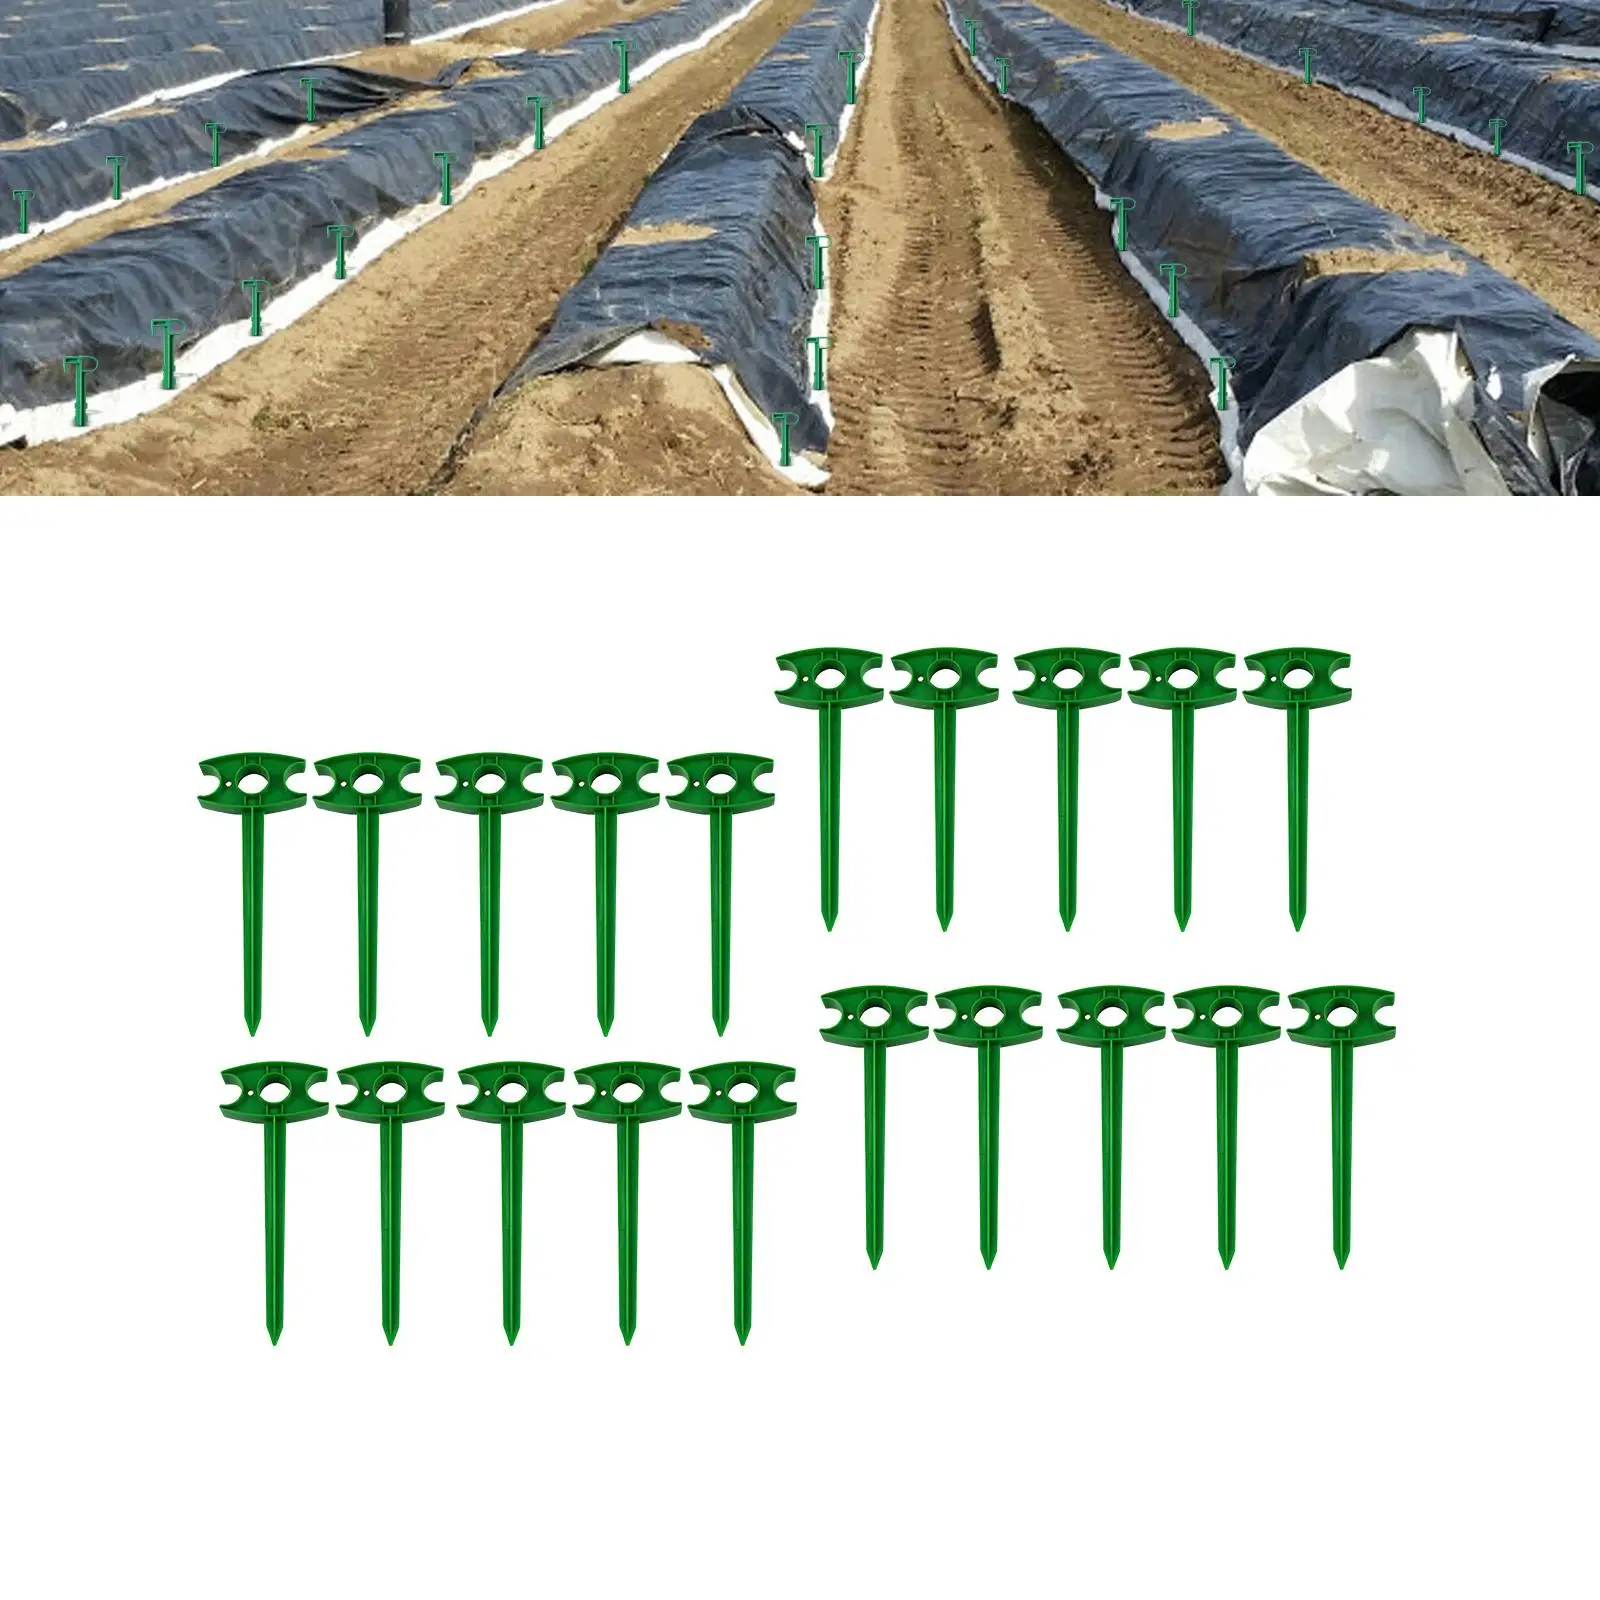 20x Durable Landscape Stakes. Garden Stakes. Multifunctional Tarp Stakes, Ground Auger Fixation Anchor Pegs